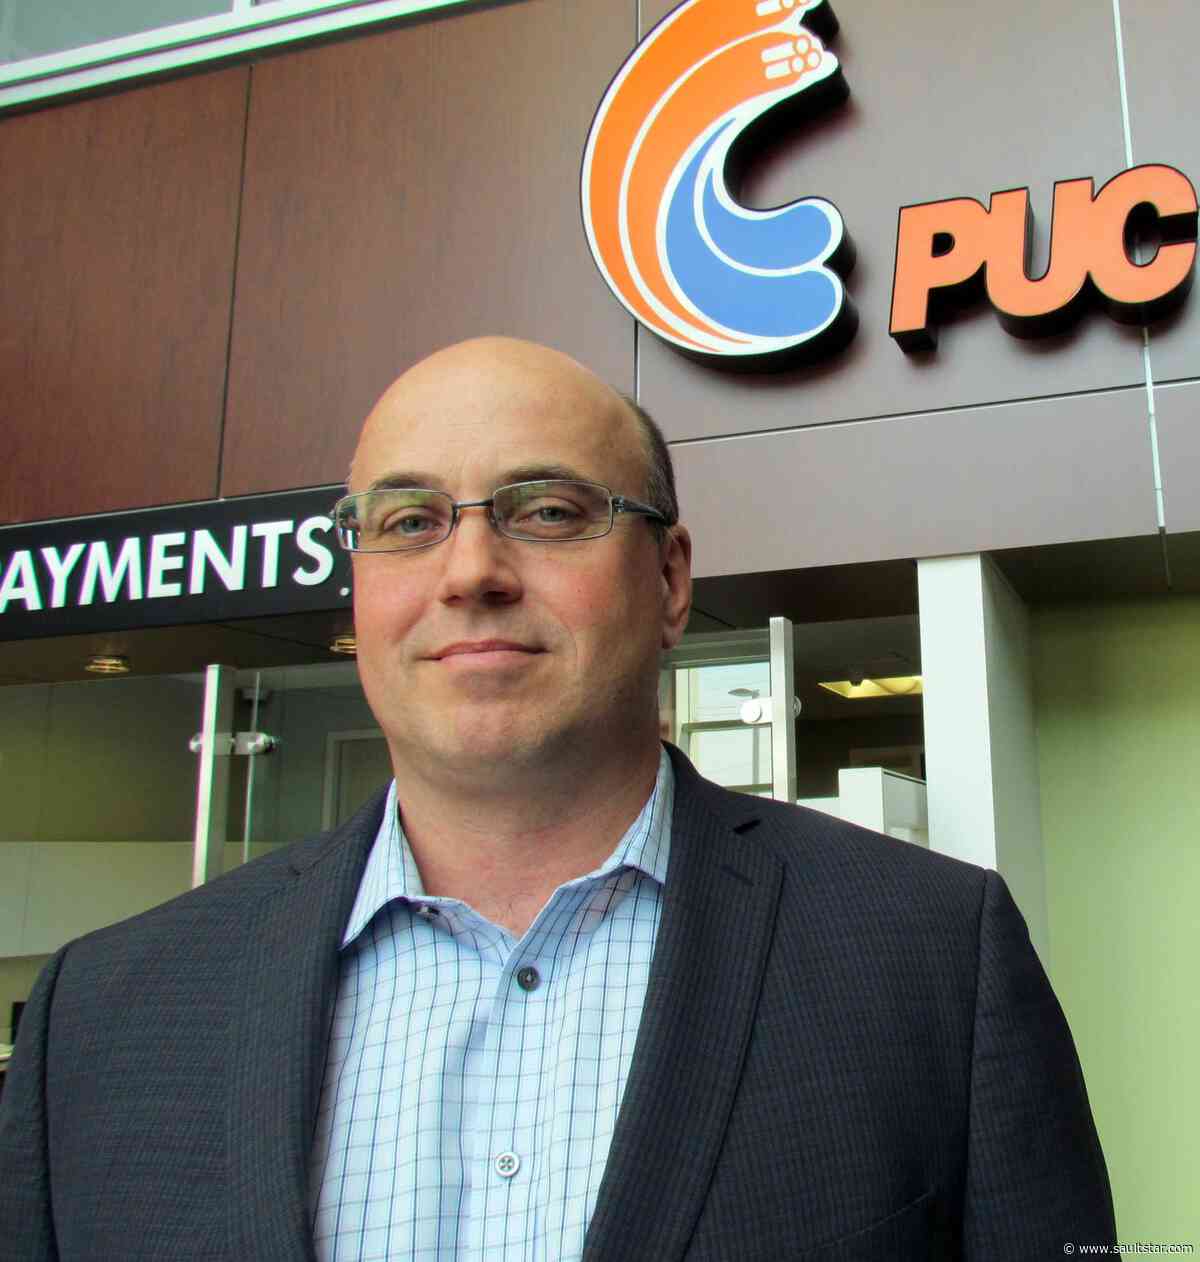 PUC pursues partnerships to seek opportunities for new energy projects